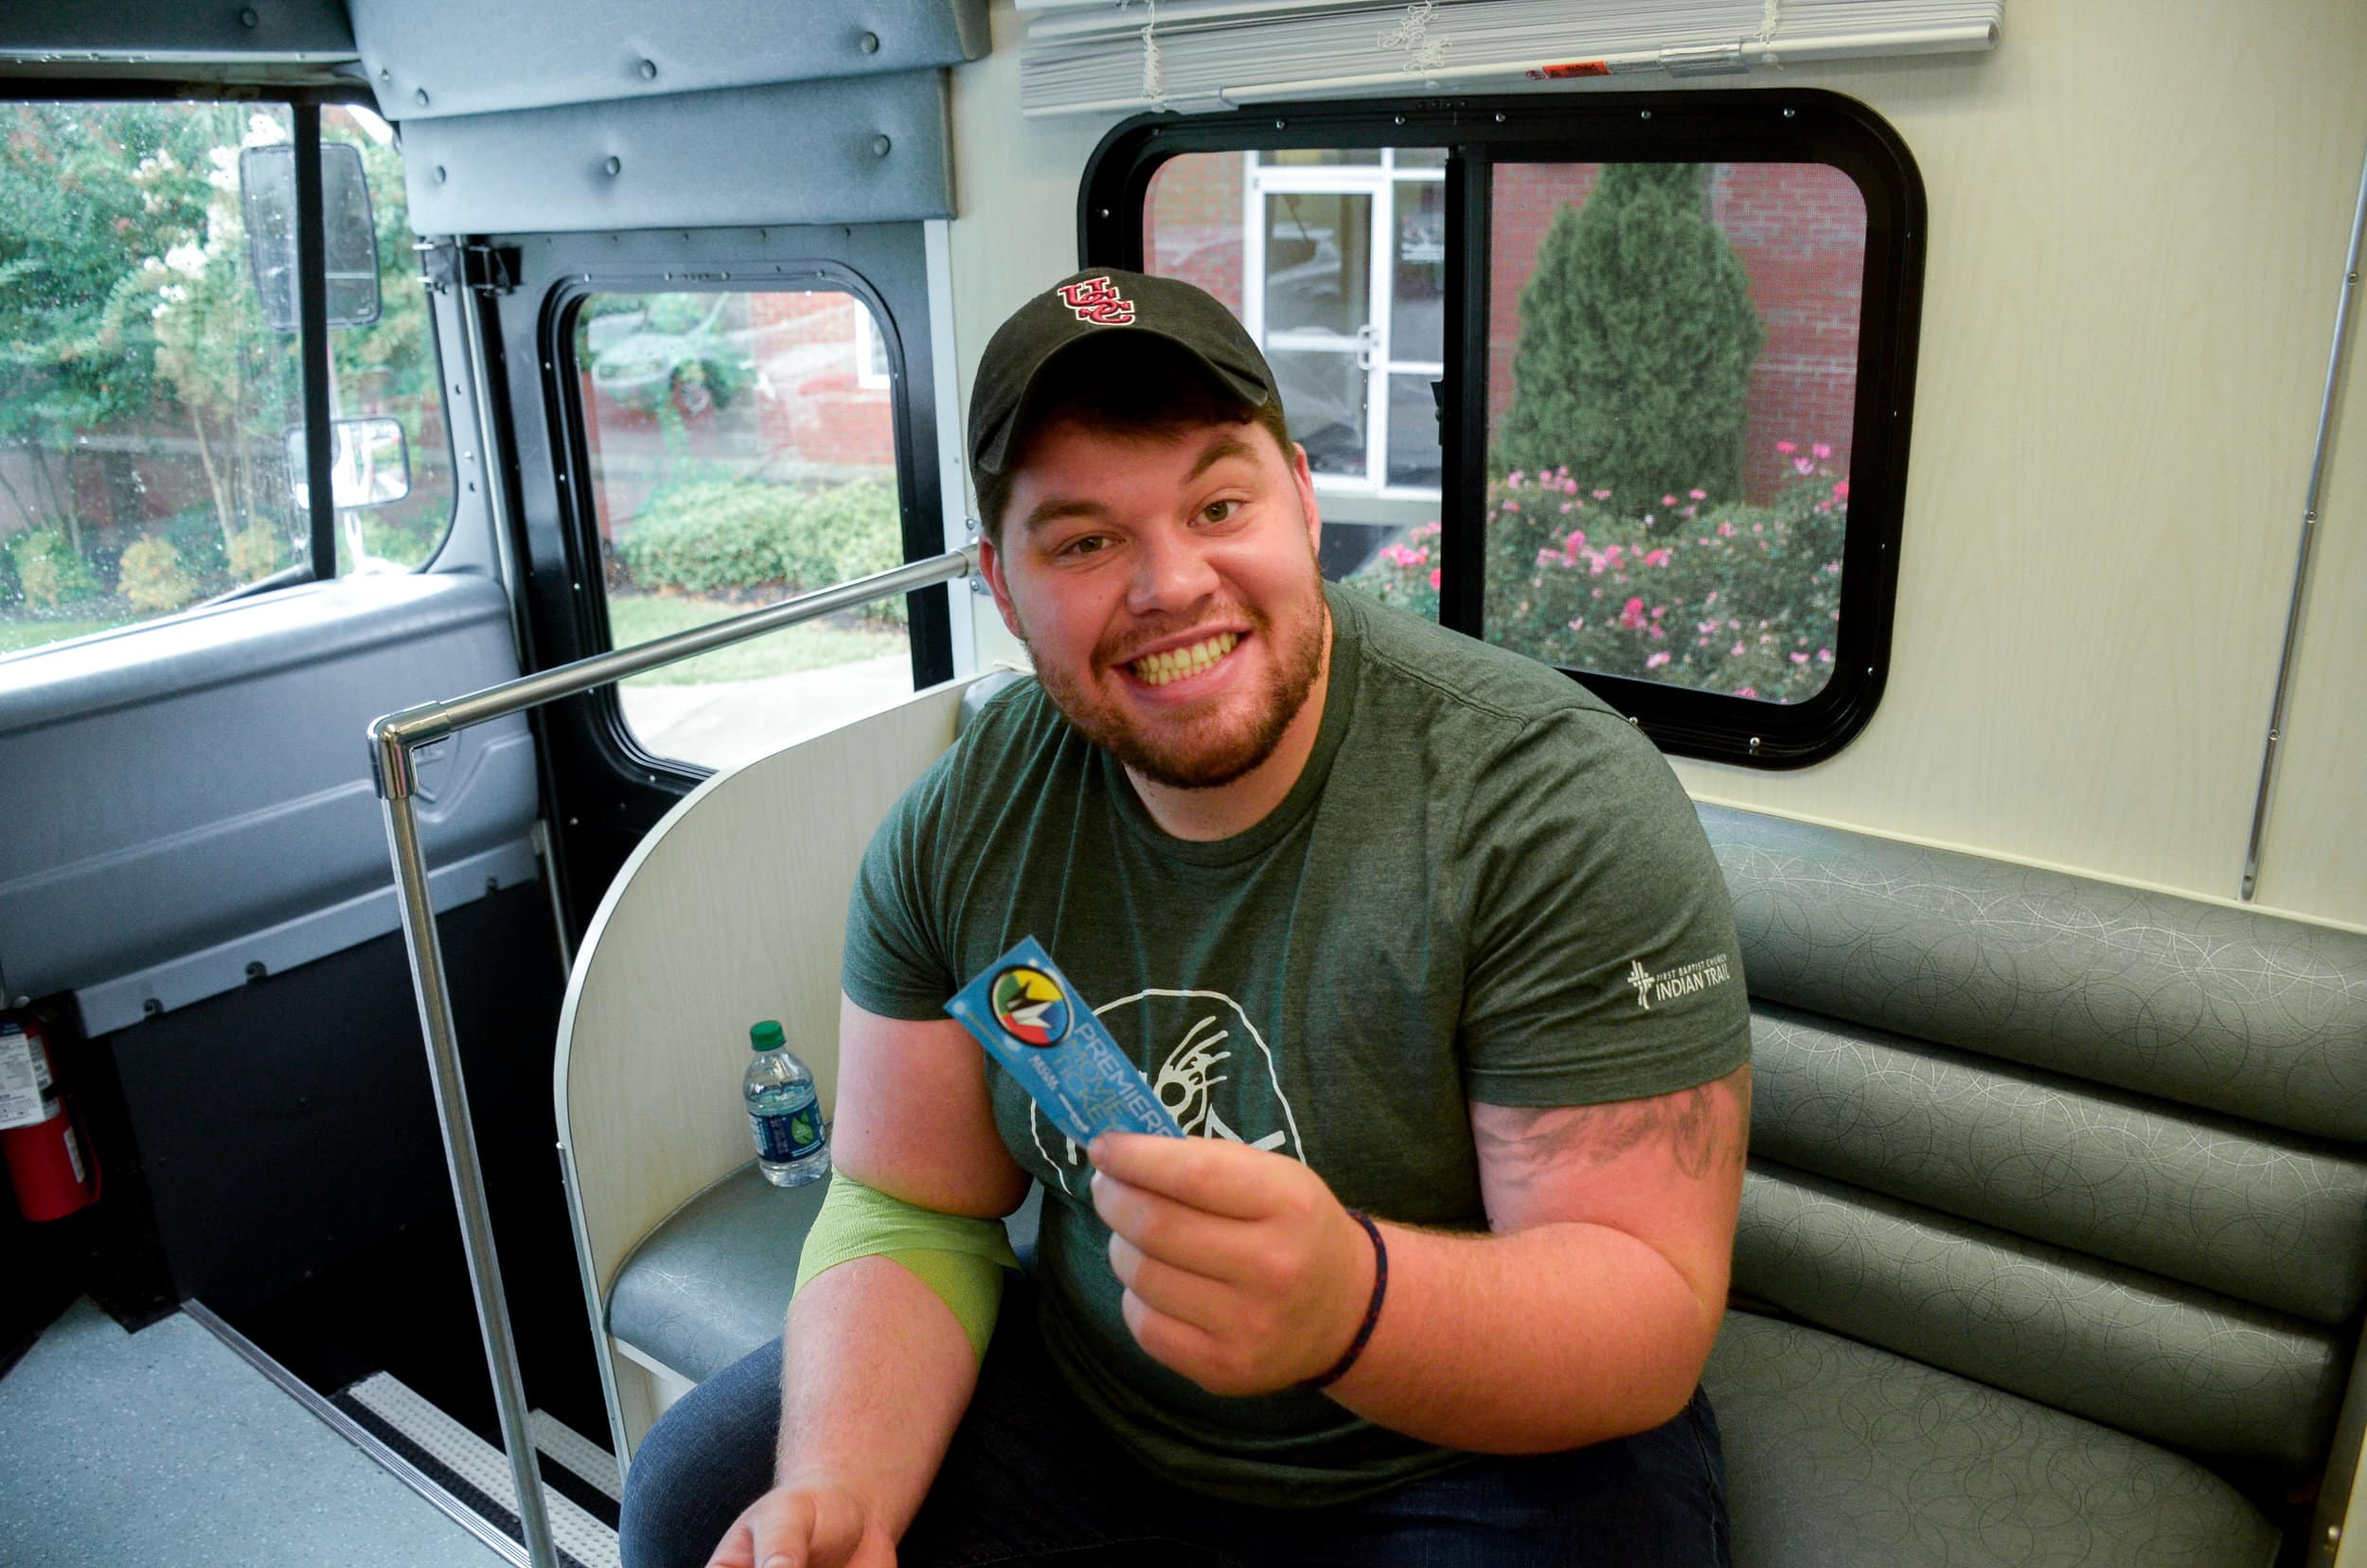 Vassar Strickland, senior, is excited about his reward for giving blood as he states, "Honestly, the only reason I give blood is for a free movie ticket."